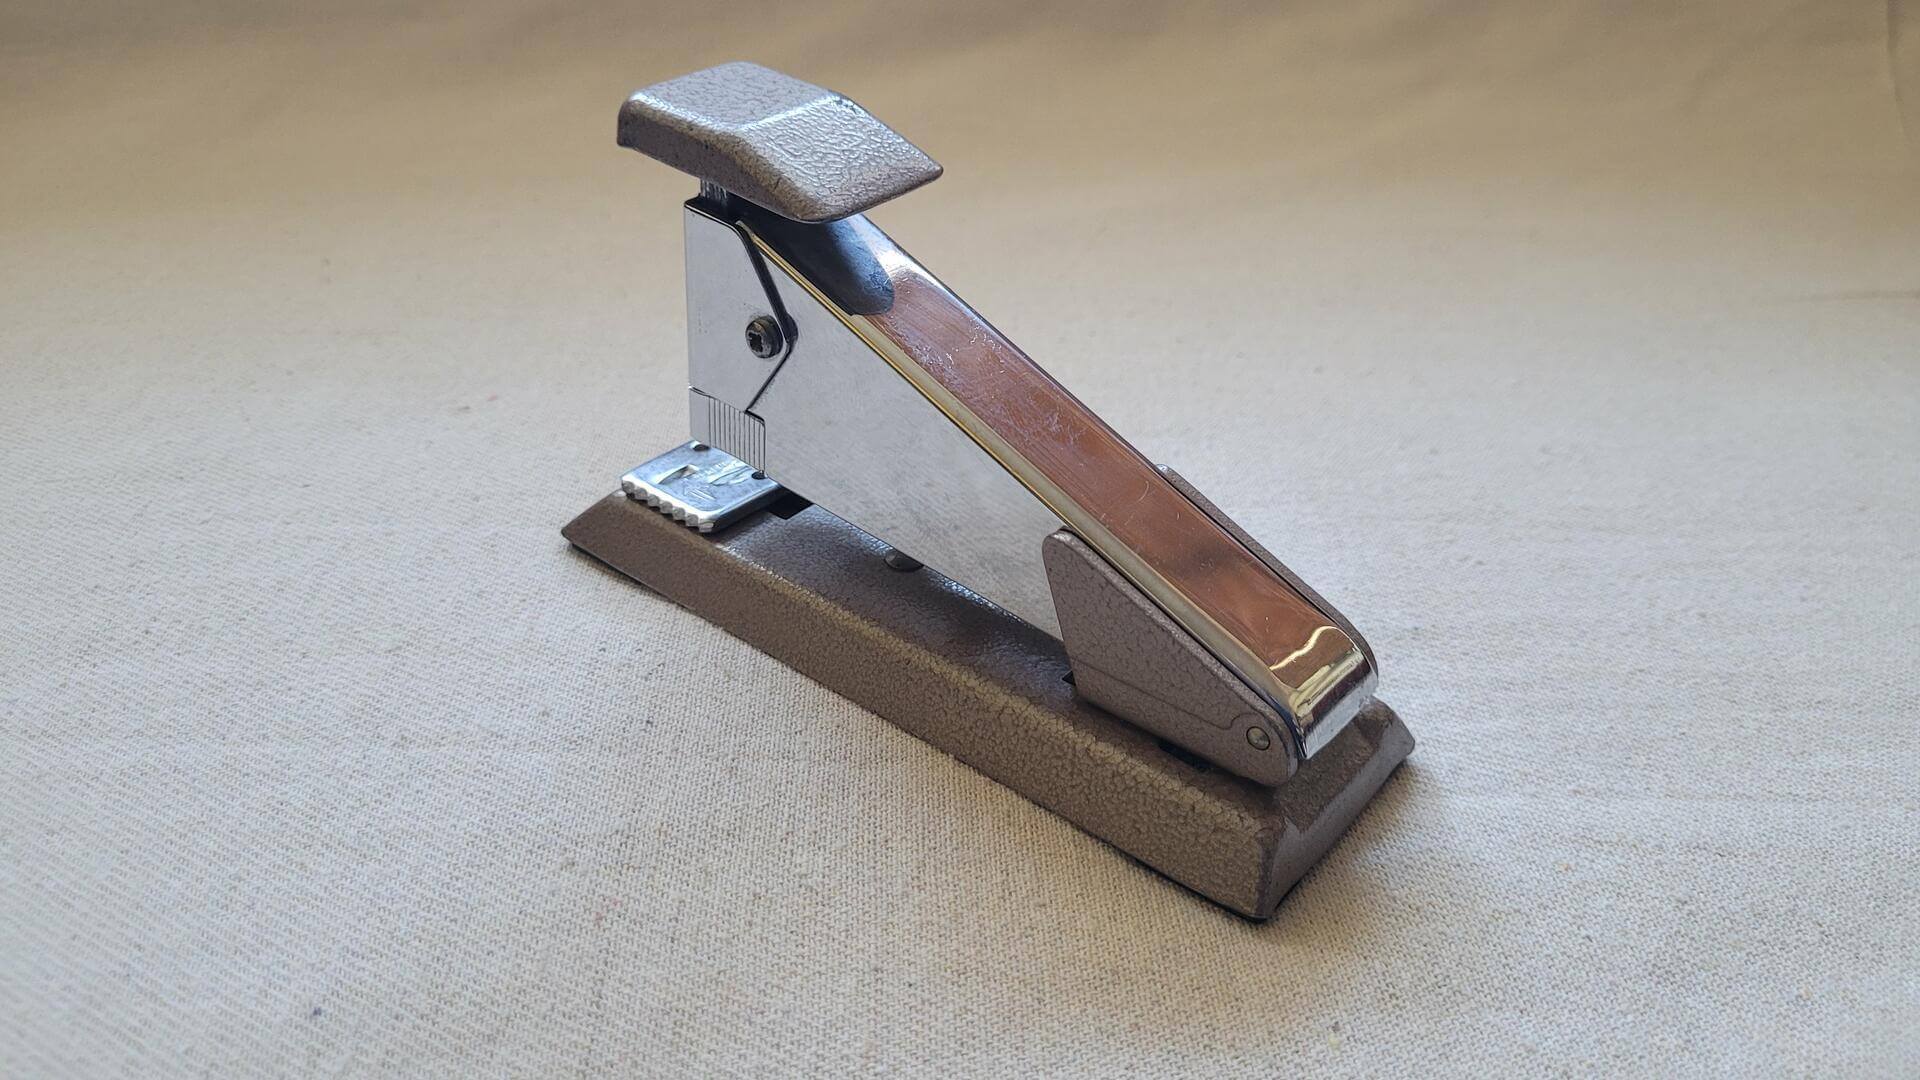 Vintage mid century Apsco 3033 De Luxe paper stapler designed by Isaberg Ab Hestra. Antique retro made in Sweden collectible office equipment and tools